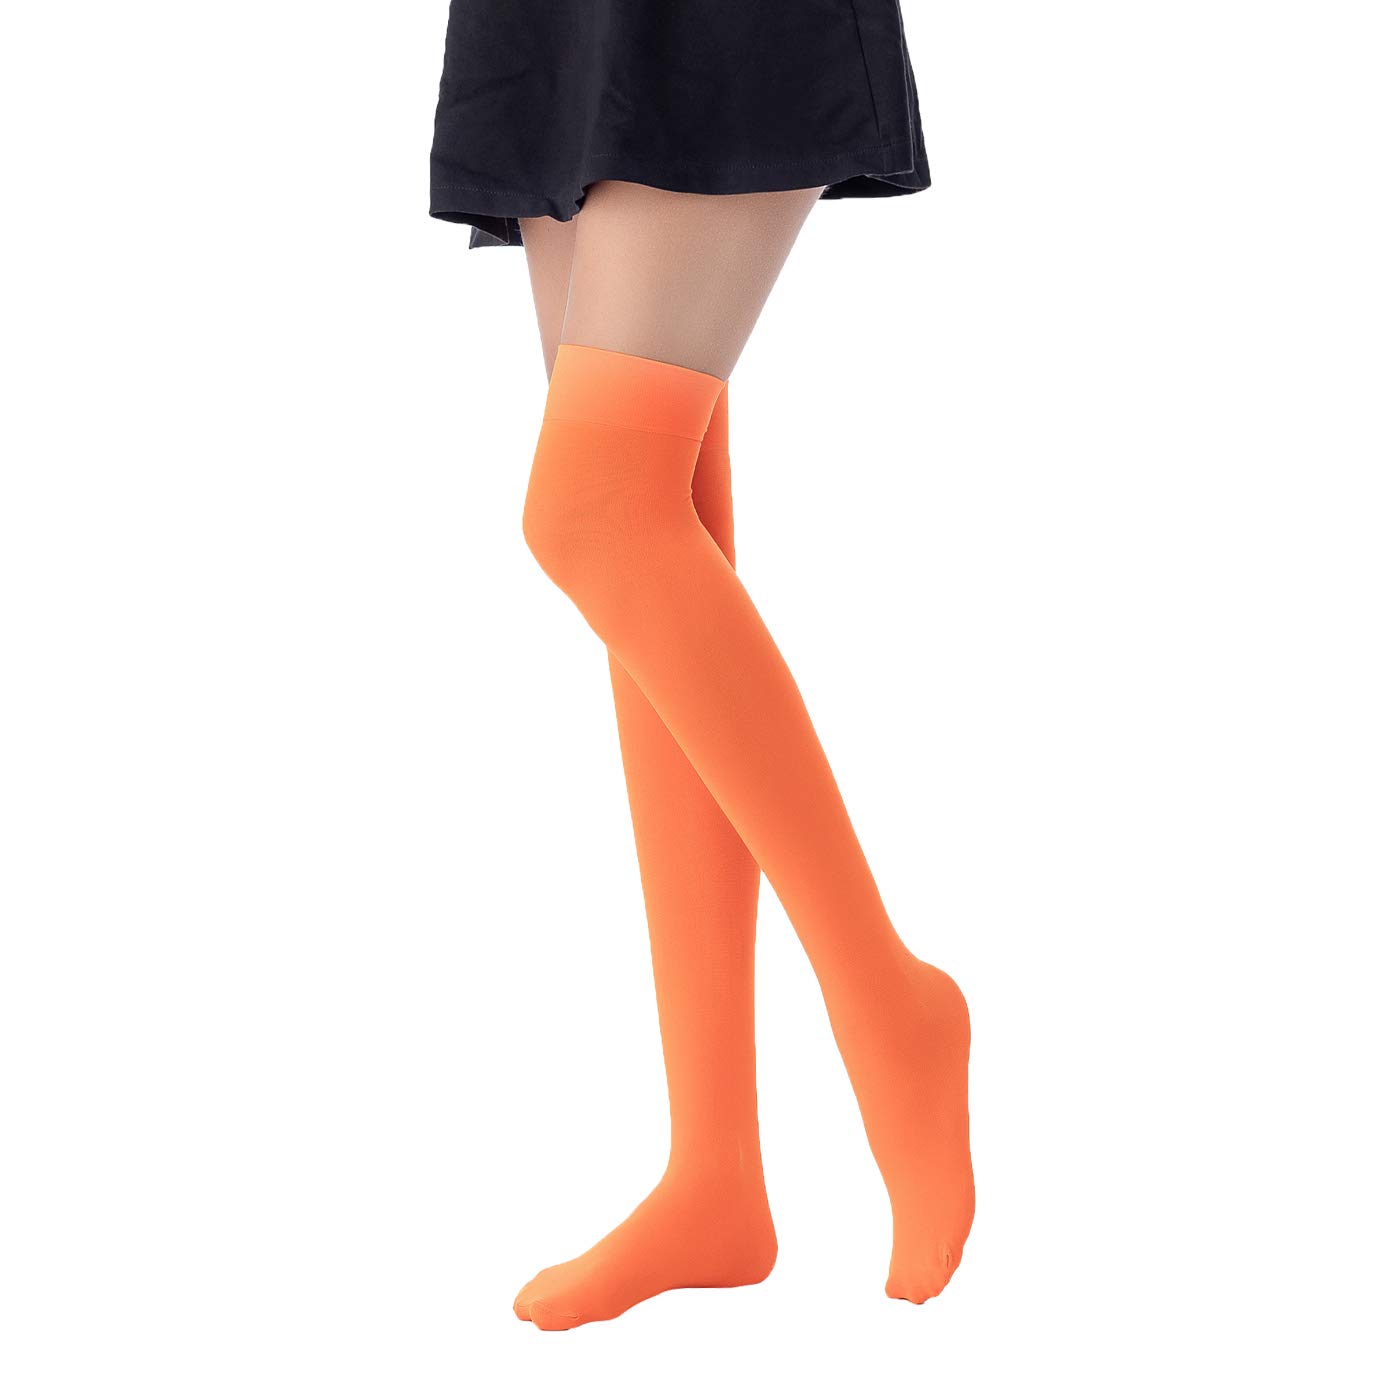 AGITATESAND Orange Socks Over Knee Stretchy Thigh High Opaque Stockings Halloween Party Costume Cosplay Knee-High Socks For Women…